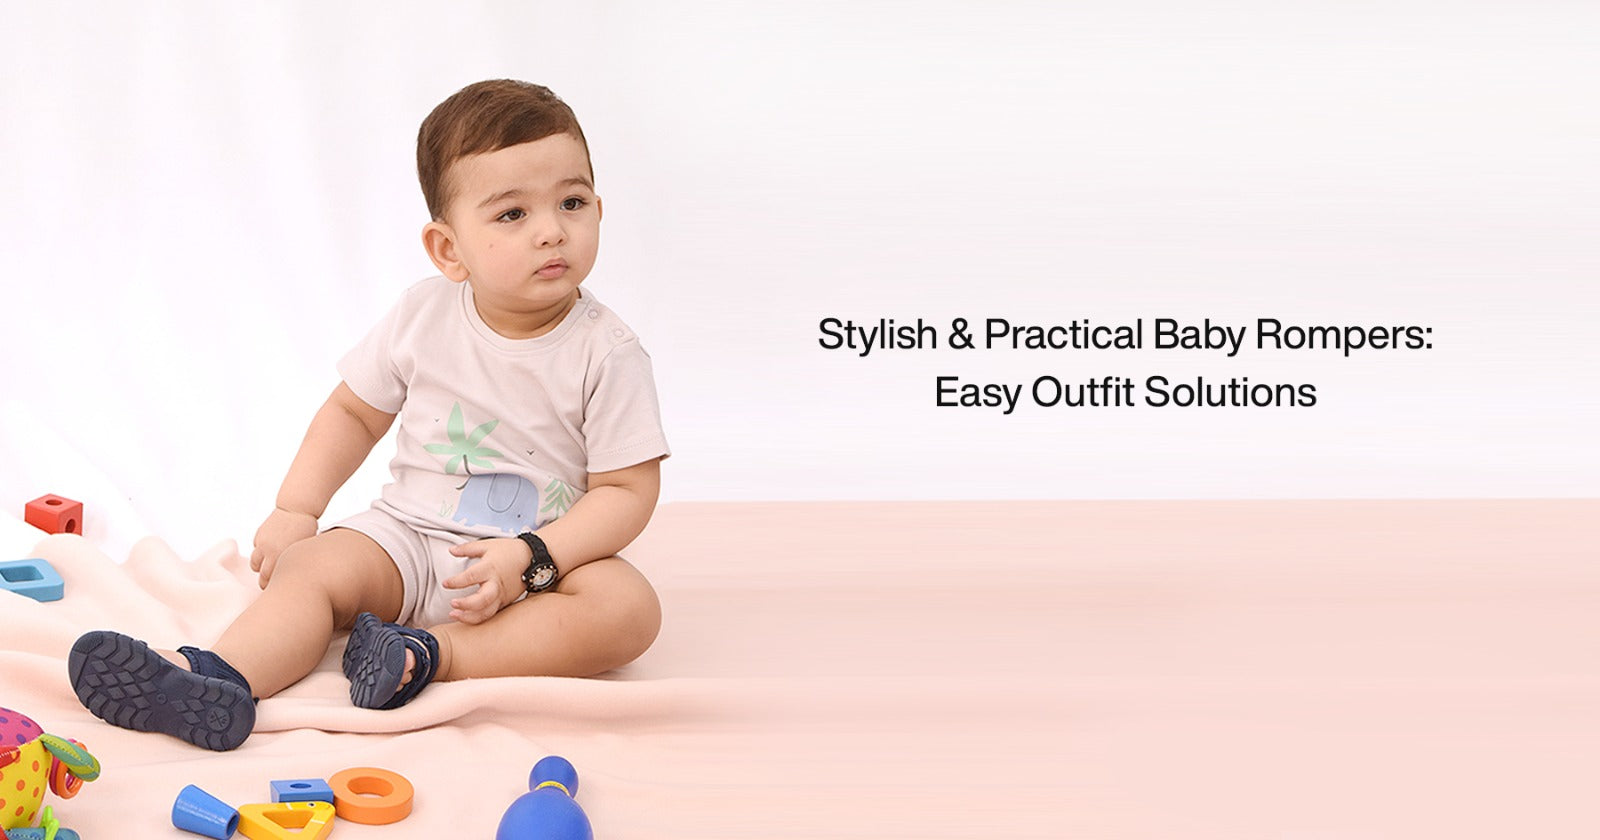 Stylish & Practical Baby Rompers: Easy Outfit Solutions